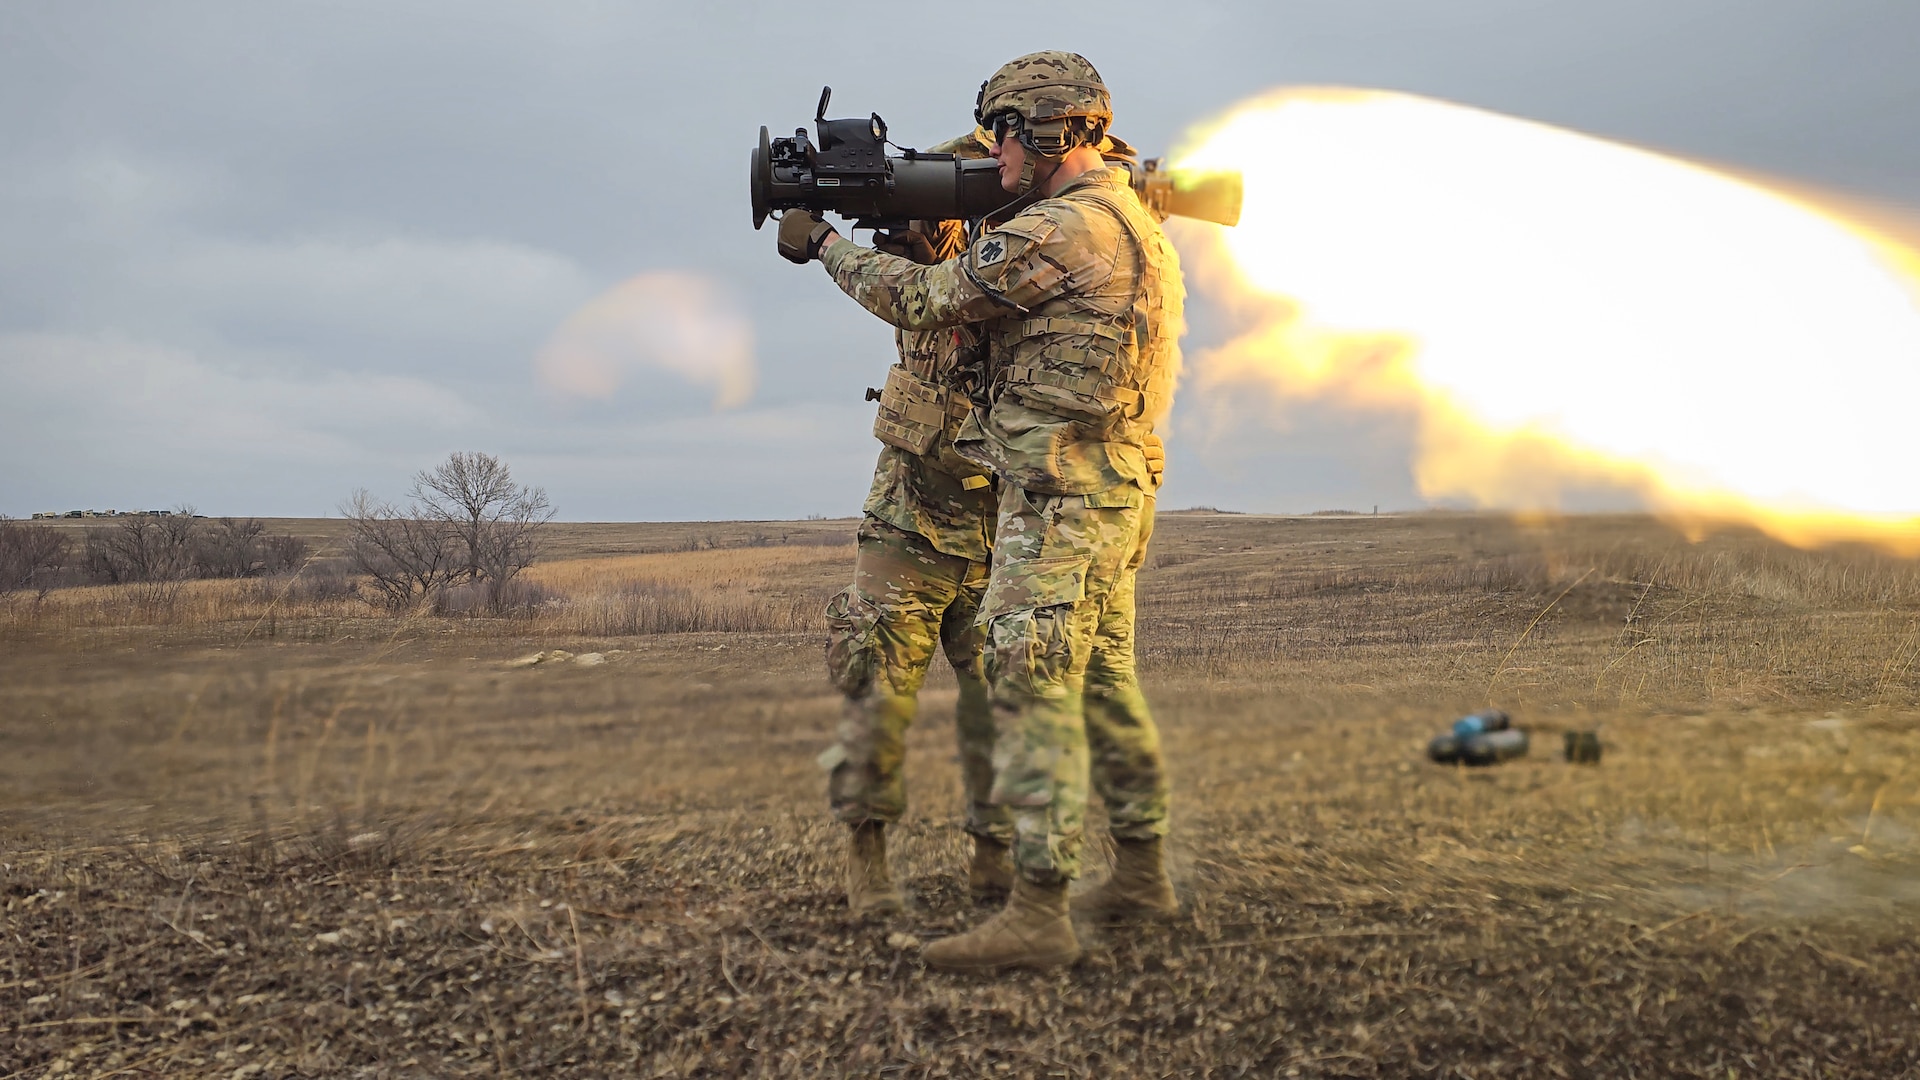 Soldiers with Headquarters and Headquarters Company, 179th Infantry Regiment, 45th Infantry Brigade Combat Team, Oklahoma Army National Guard, fire an AT4, a shoulder fired, recoilless anti-tank weapon, at Fort Riley, Kan., March 26, 2023. 45th IBCT Soldiers conducted pre-mobilization training in preparation for their upcoming deployment as Task Force Tomahawk supporting operations across three East African countries. (Oklahoma National Guard photo by Spc. Danielle Rayon)